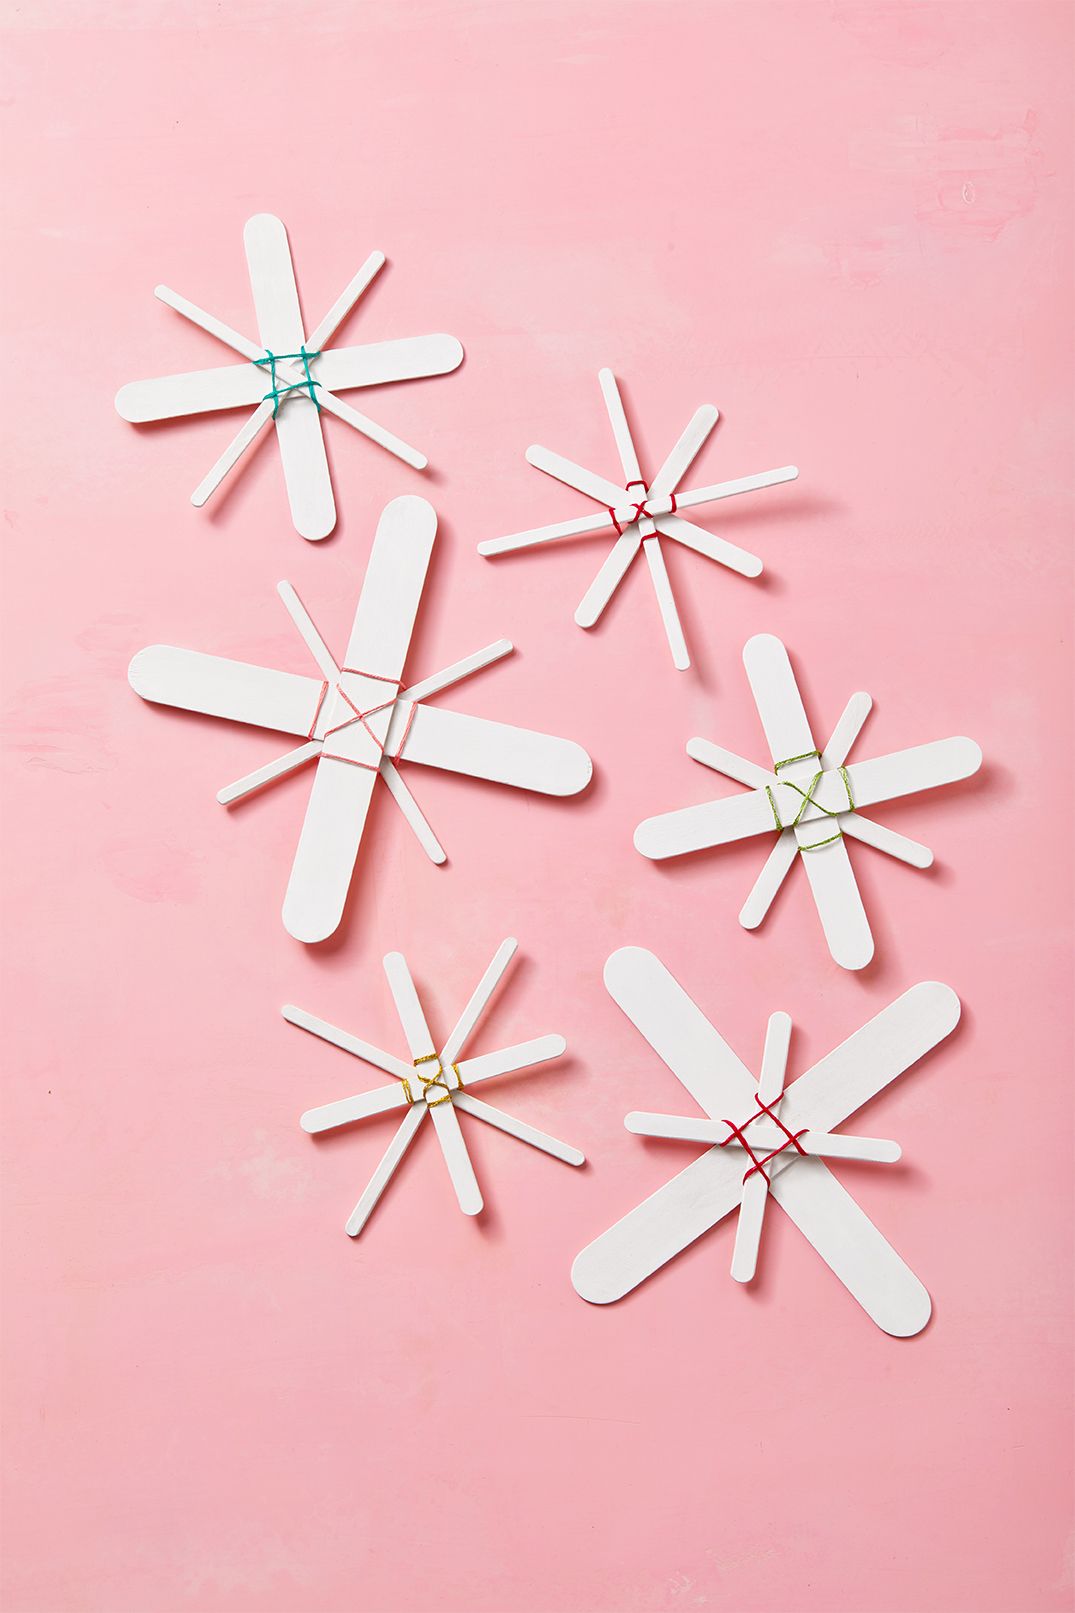 Popsicle sticks can make for great crafts! Source: Good Housekeeping